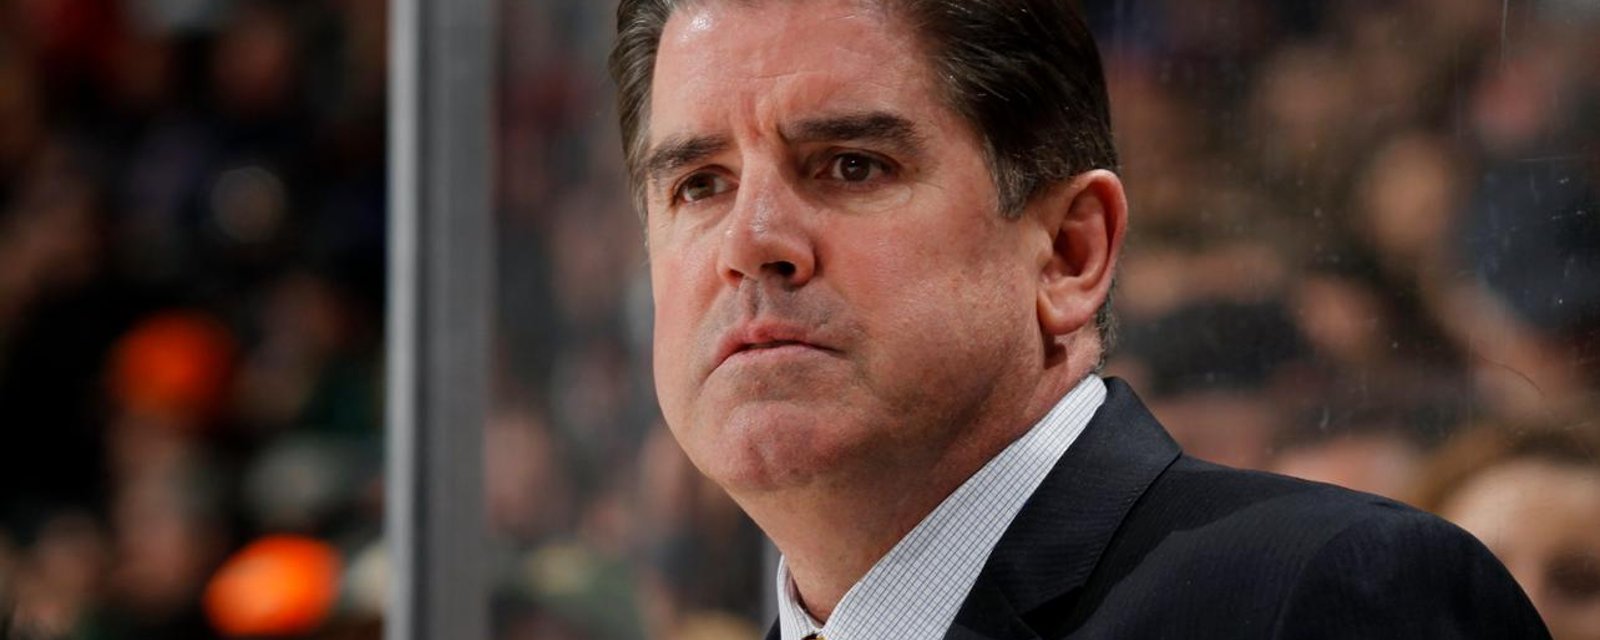 Peter Laviolette comes to the defense of Tom Wilson.